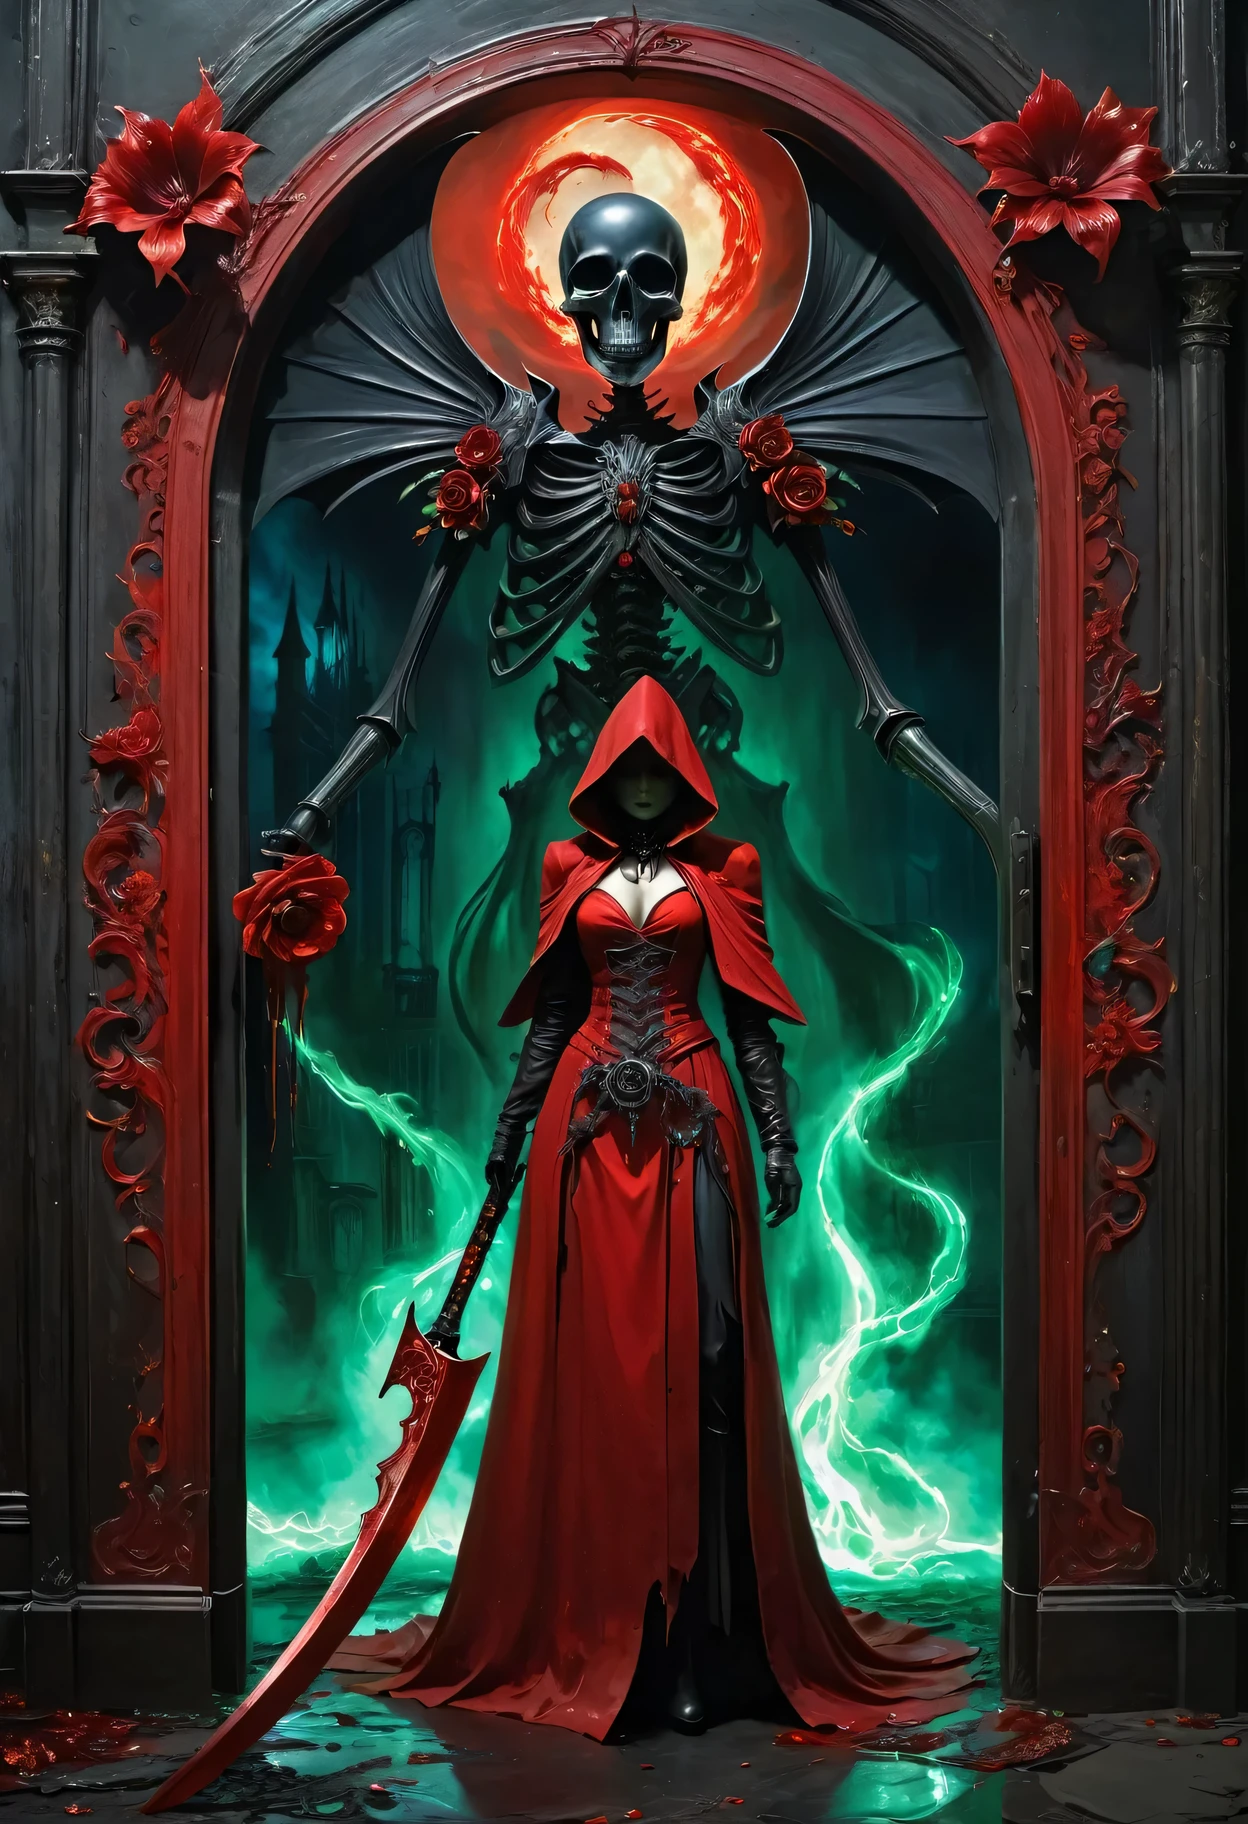 A painting of a beautiful red-robed female death standing in front of，Holding the Reaper Scythe，Door of hell，Blooming bloody ghost flower，soul，Charm，frivolouystery，Heavy Metal Style，Metal Art，The flowers made of iron have a metallic luster，Metal texture in the post-industrial era，Crystal Pendant，Jadeite Inlay，Carefully crafted，Perfect craftsmanship，Blue magic lightning background，Dark fantasy art，Dark fantasy concept art，Bloodborne concept art，Dark Concept Art，Dark Digital Concept Art，Dark fantasy art style，CG Society，Red Blood Art，Realistic Dark Concept Art，Concept Movies，Art in dark fantasy style，Fantasy illustration